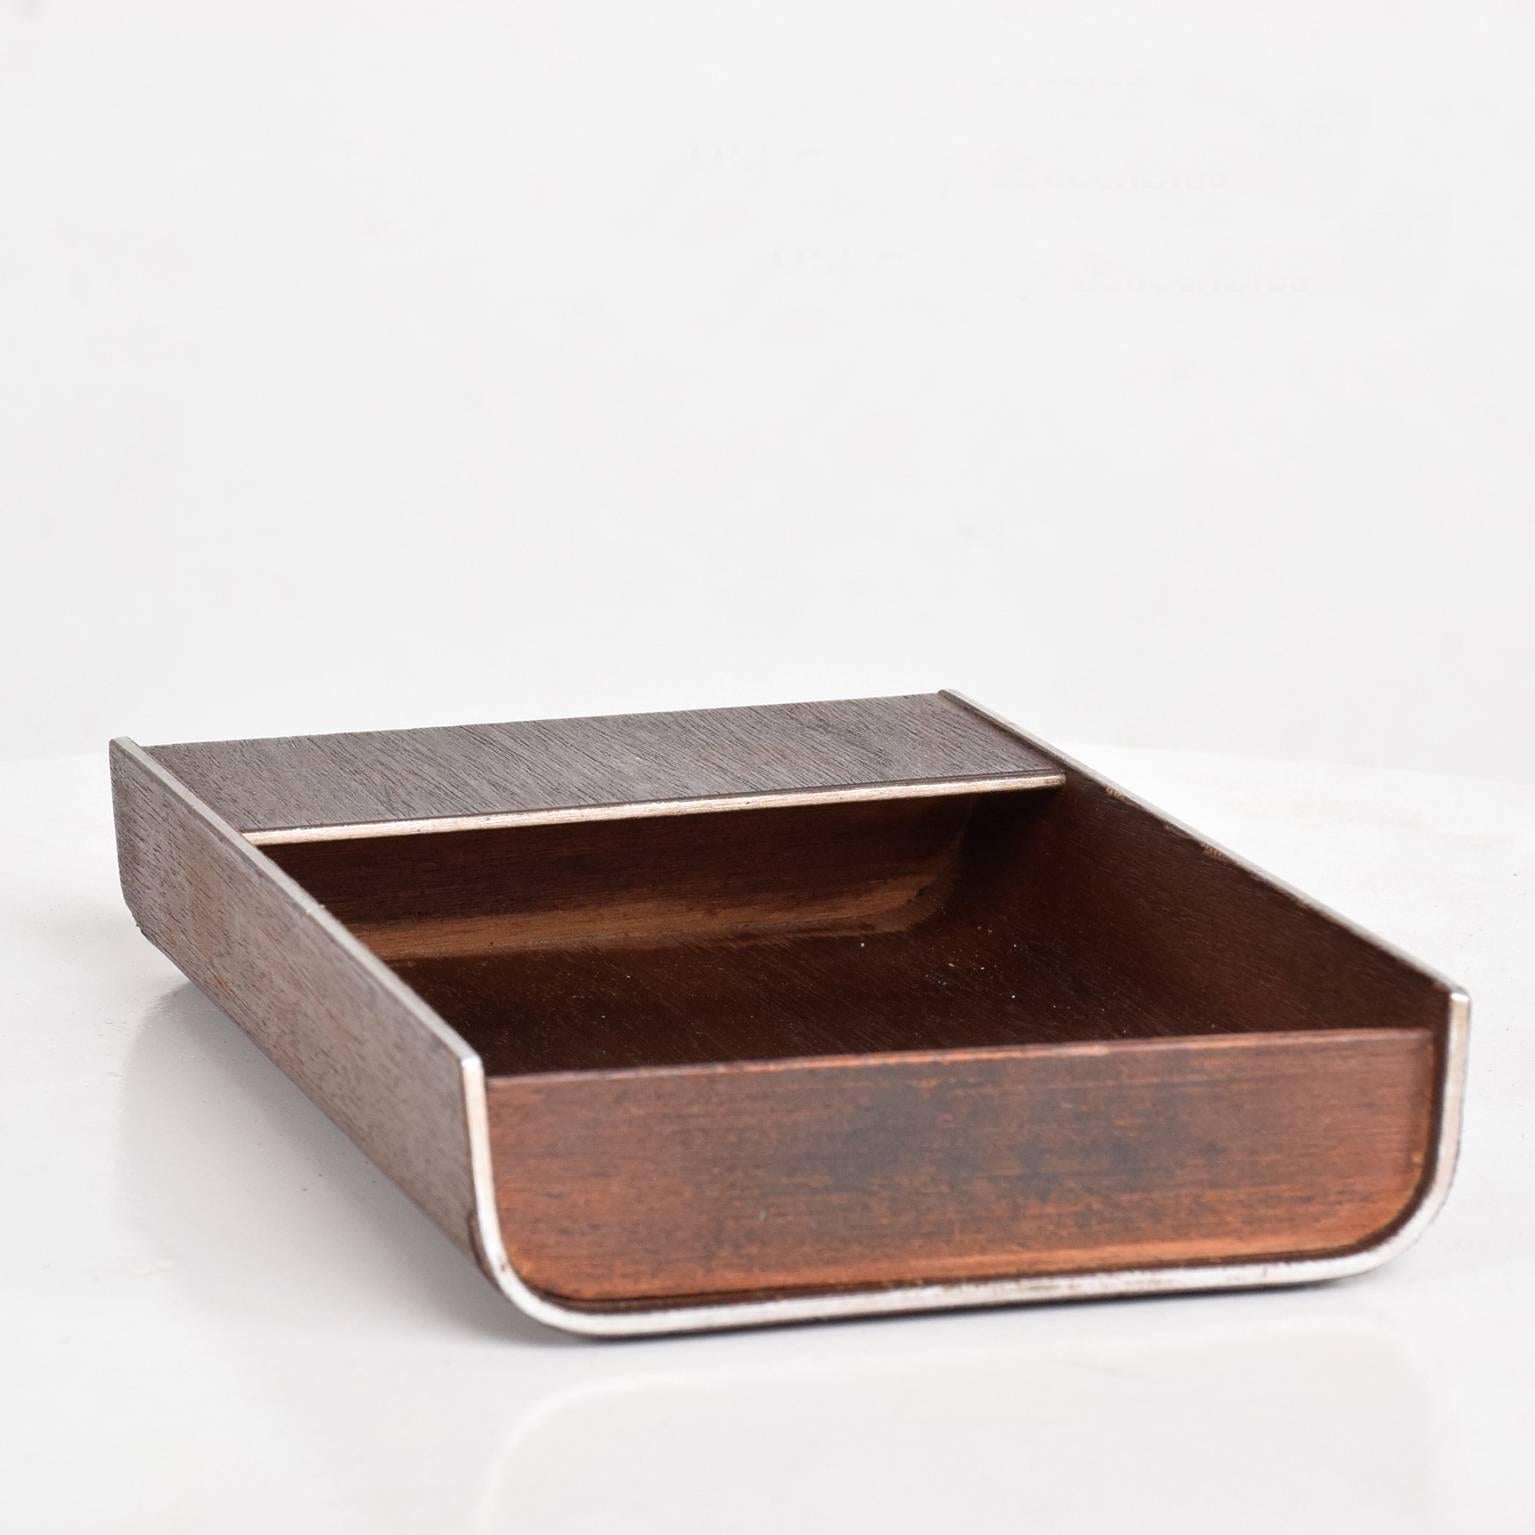 We are please to offer for your consideration a unique desk accessory tray. Constructed with aluminum frame with walnut veneer and solid walnut sections. Retains original label from the maker underneath. 
A must have item. 

Dimensions:
1 3/8